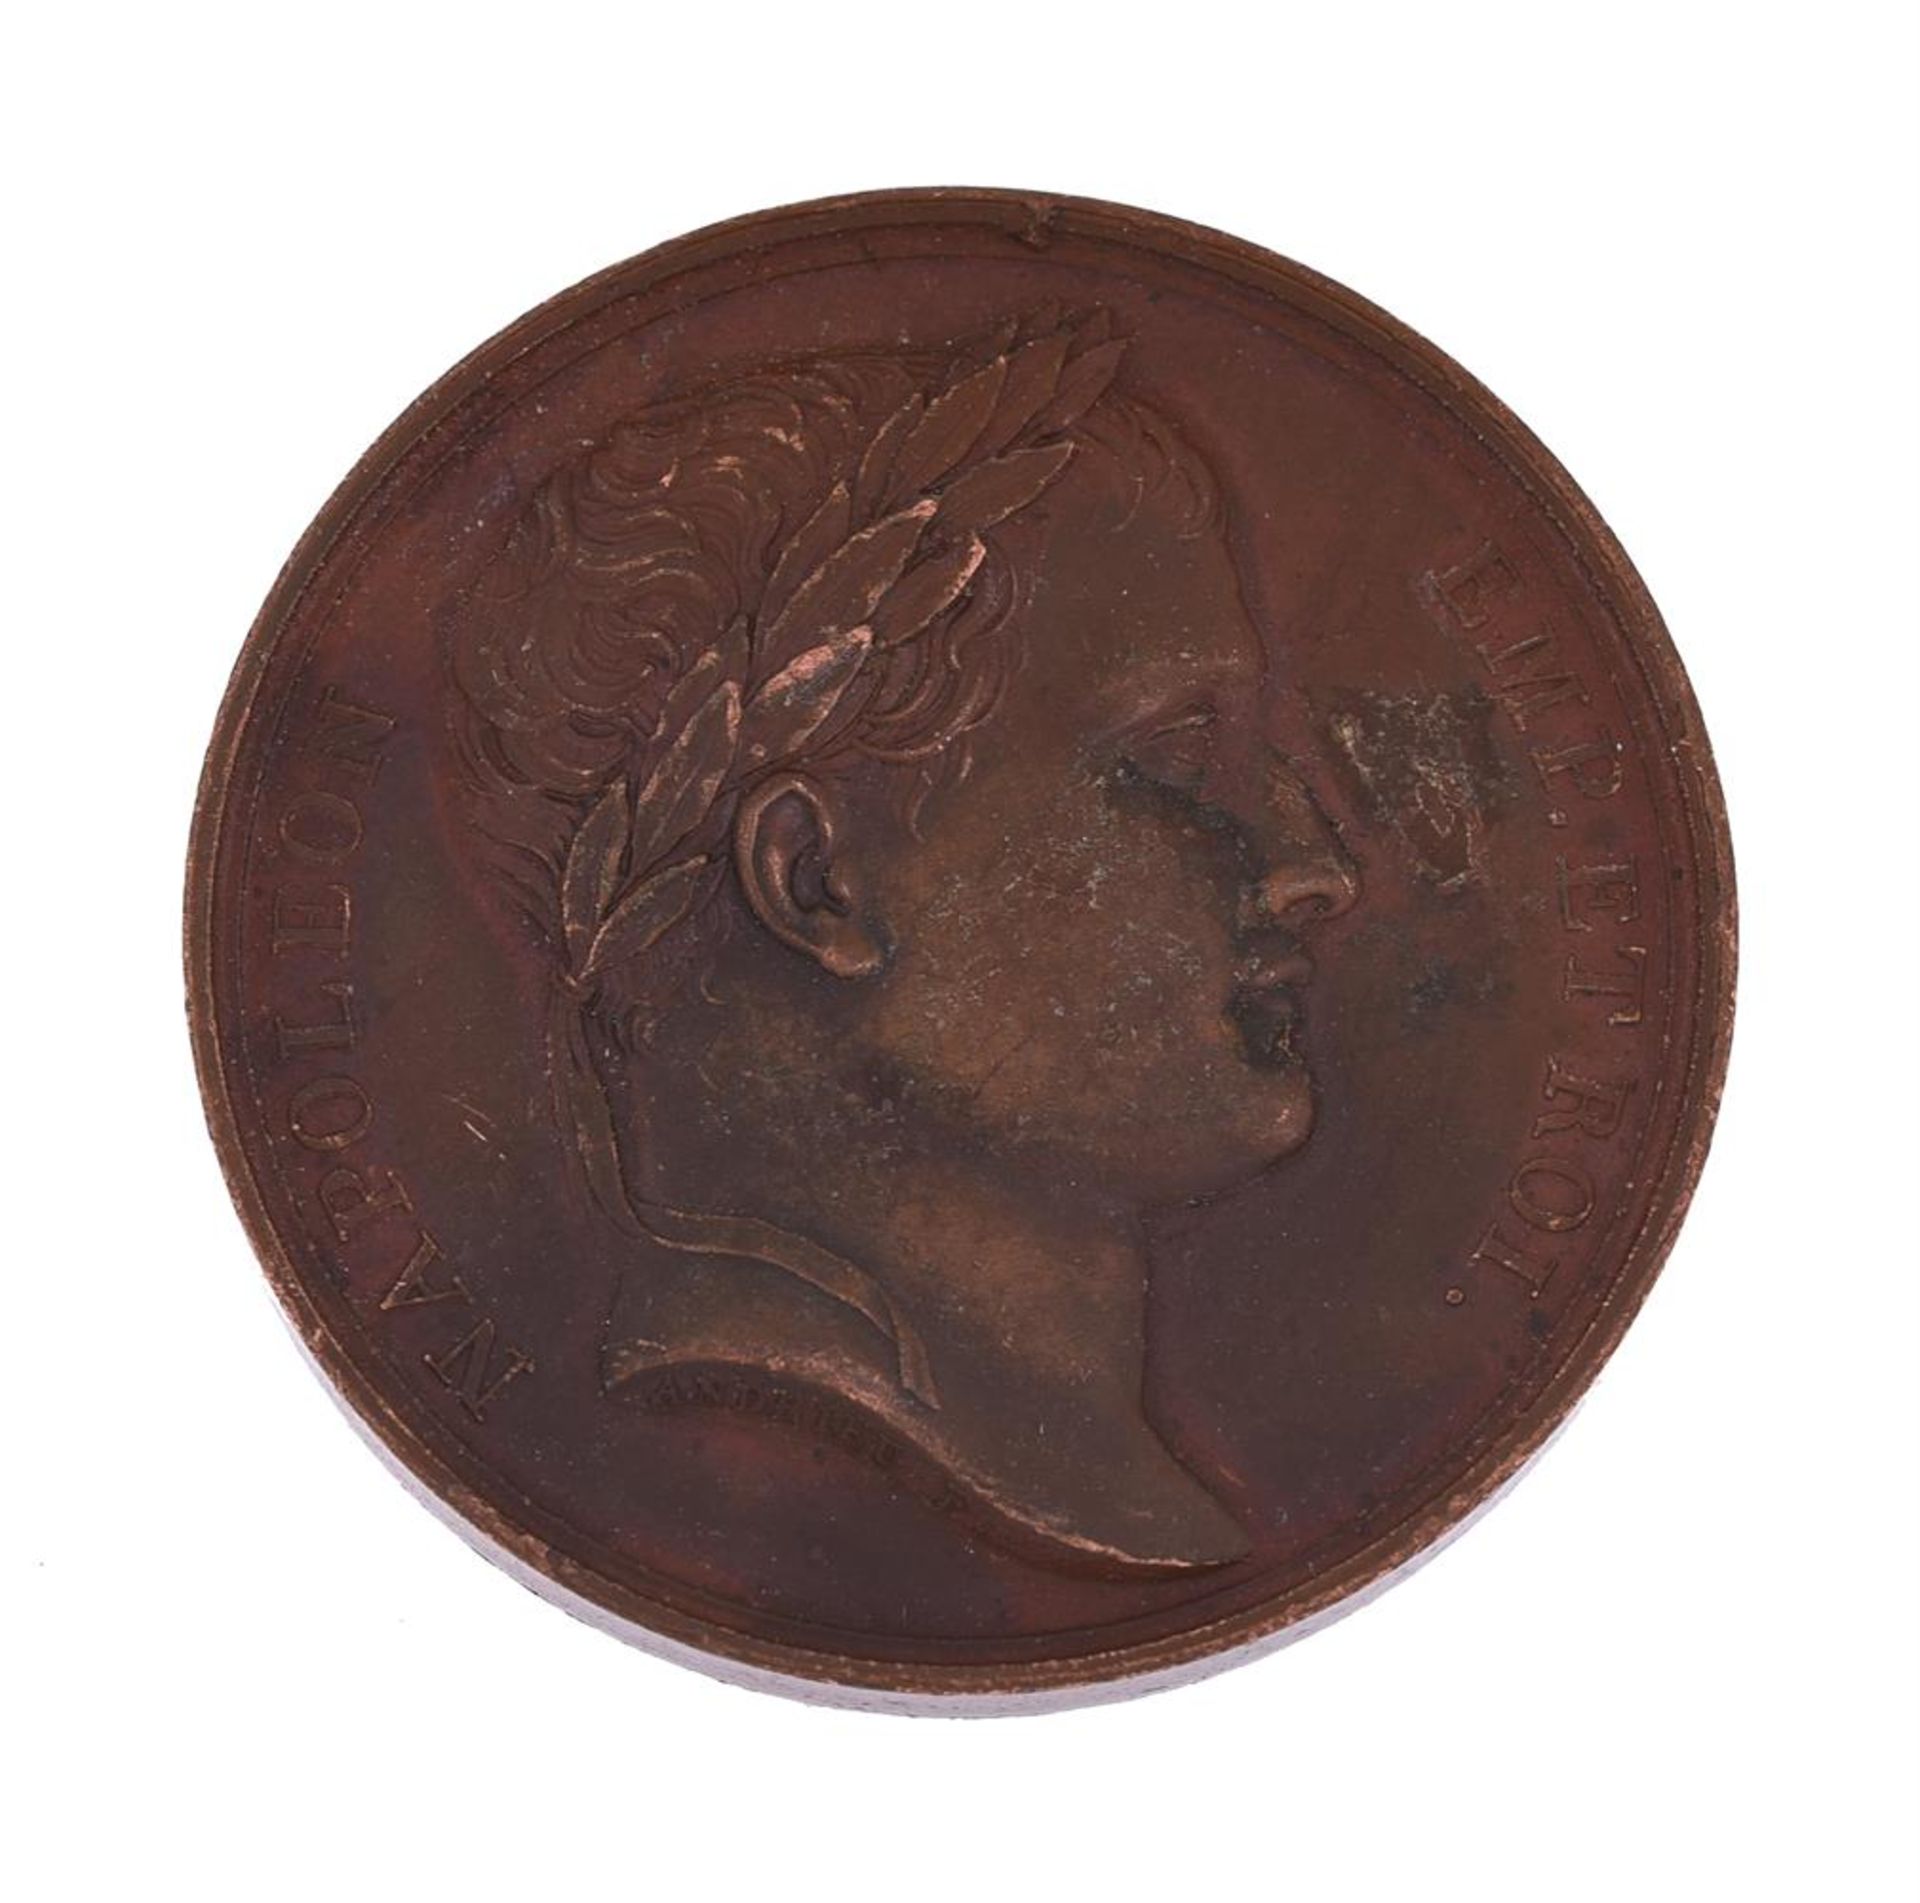 FRANCE, NAPOLEON, BATTLE OF RAAB 1809, BRONZE MEDAL BY ANDRIEU AND DUBOIS - Image 2 of 2